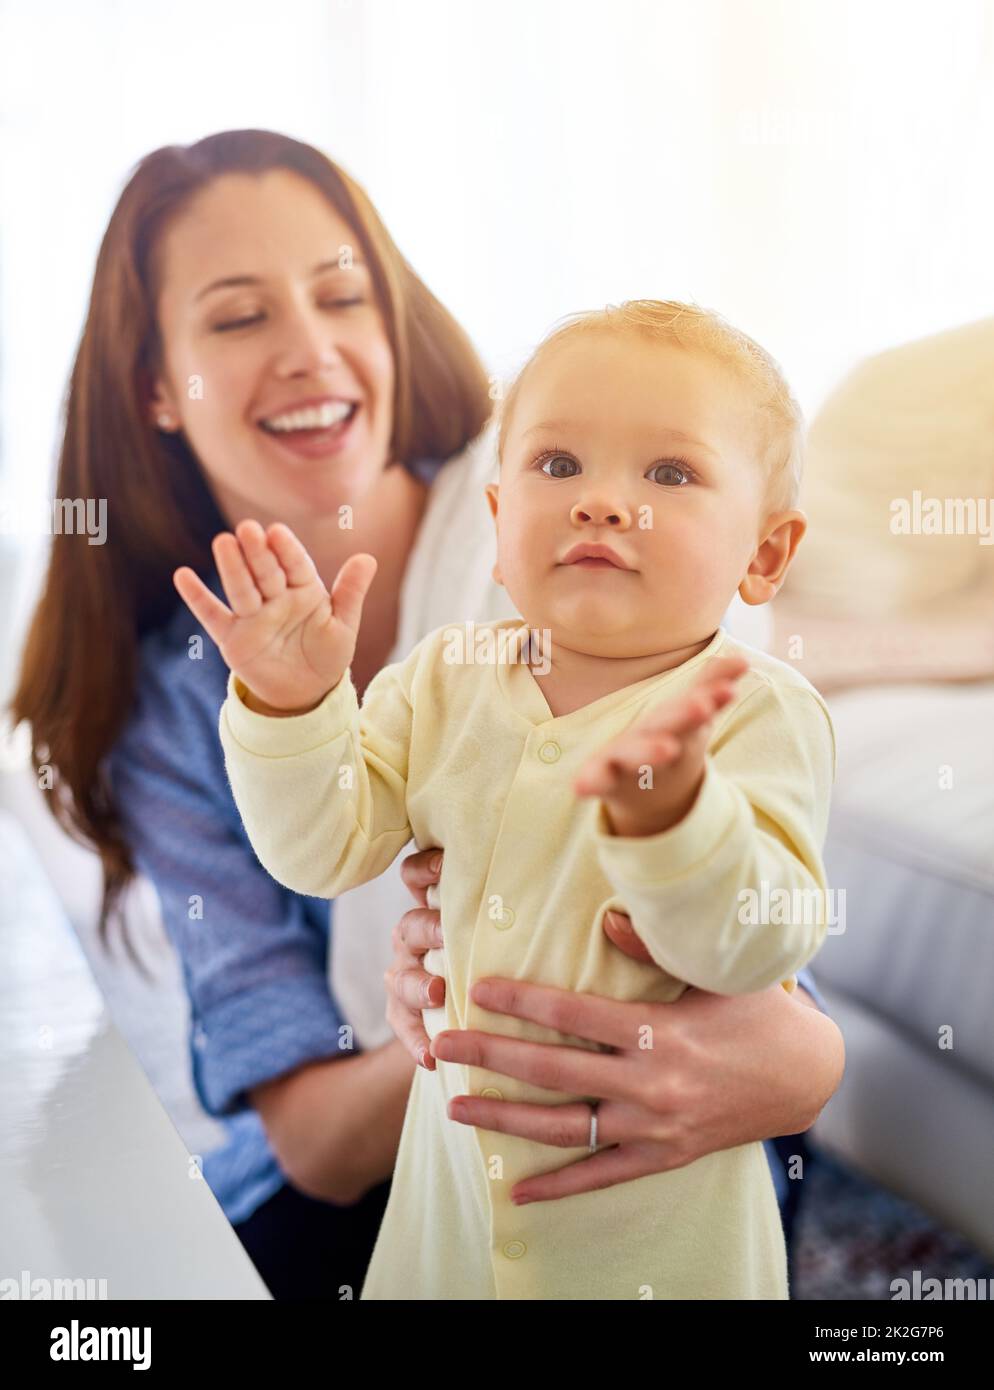 Thats my jam, mom. Shot of a mother spending time with her baby boy. Stock Photo